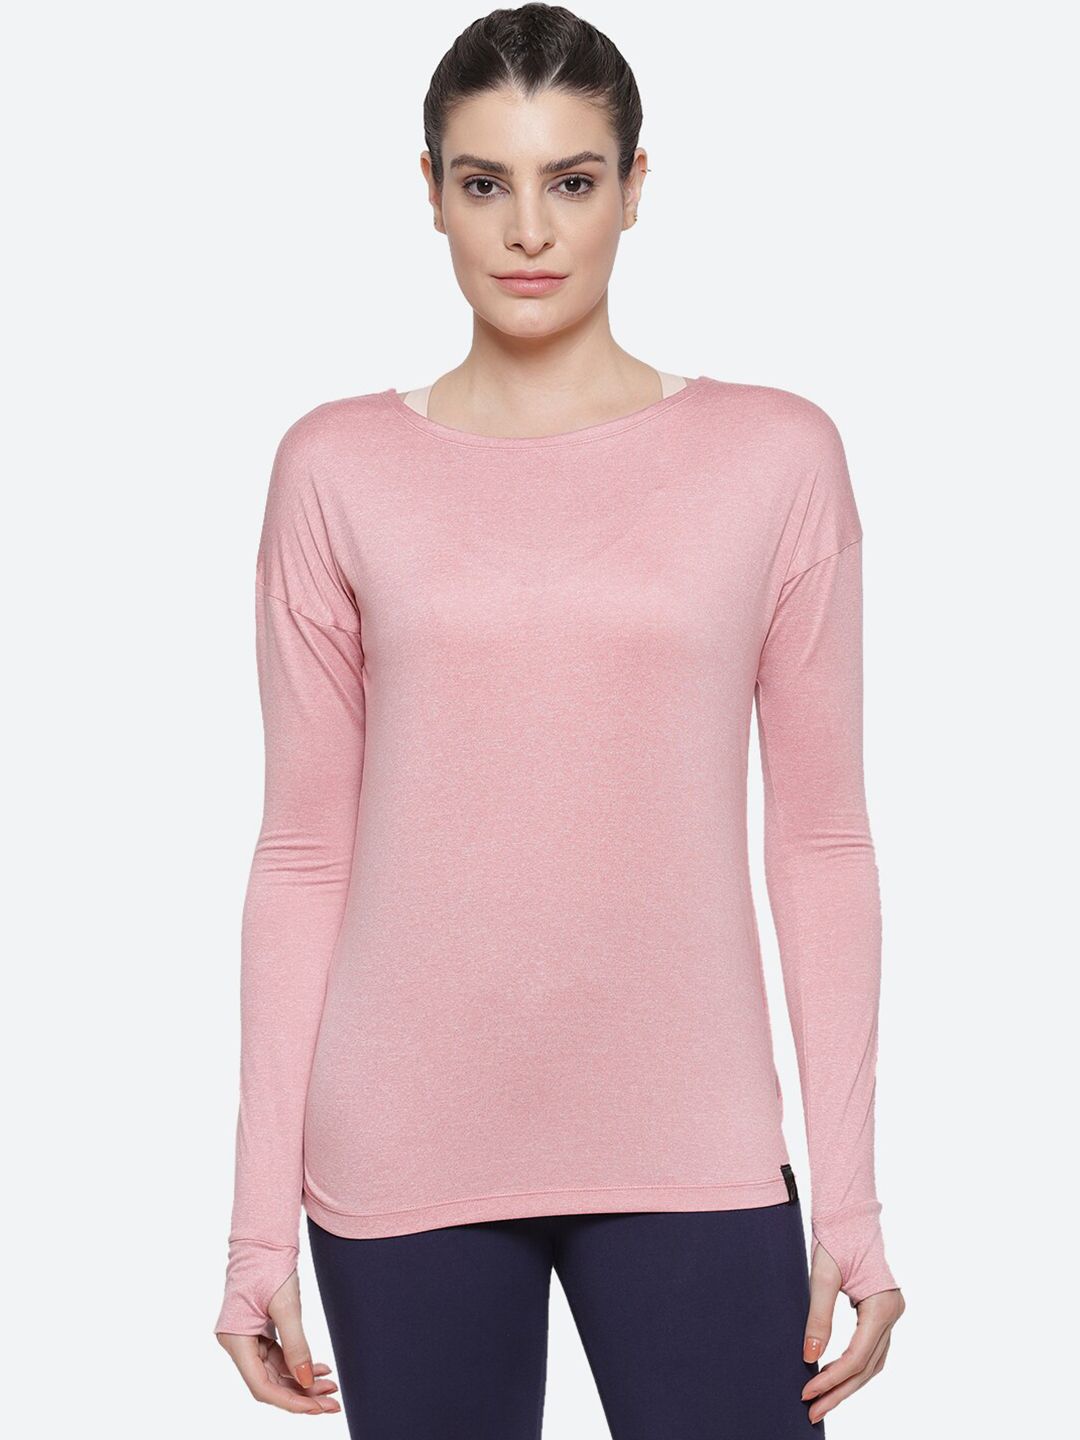 ASICS Women Pink Cut Outs Training T-shirt W LS Price in India